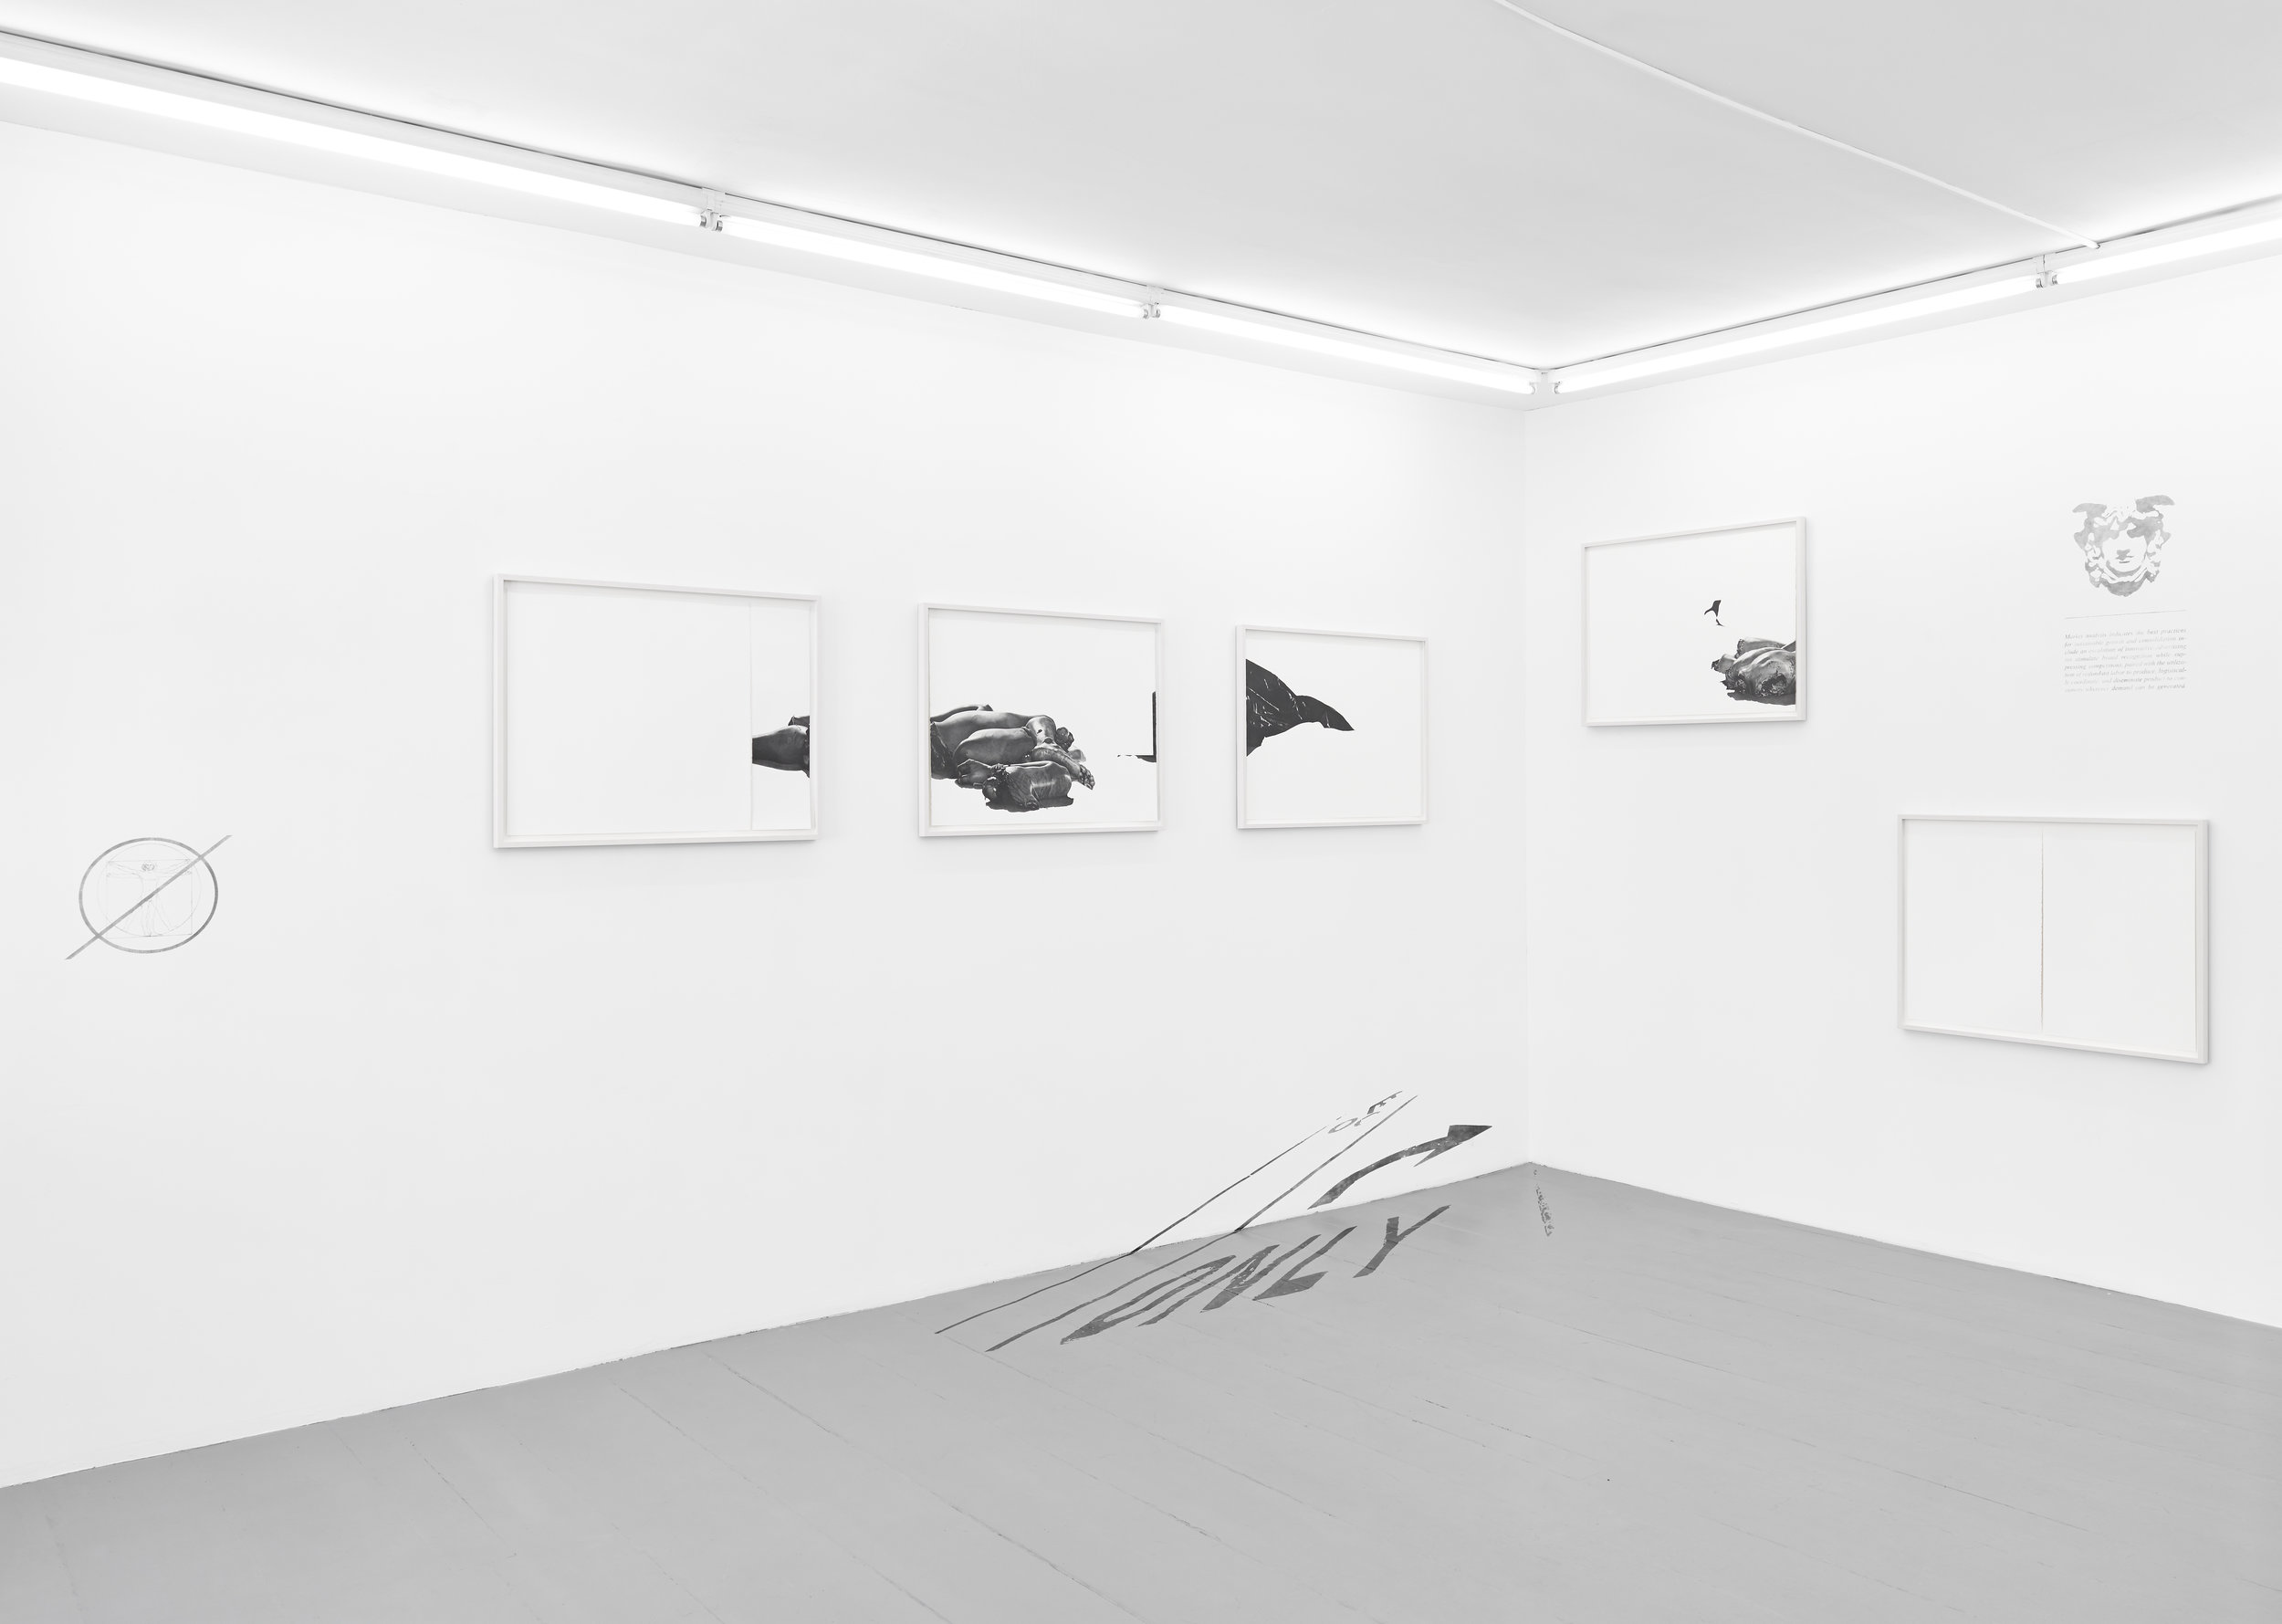  “post-human (unidentified, Cuernavaca, 2011)” graphite on paper, graphite on wall and floor, dimensions variable, 2015. 